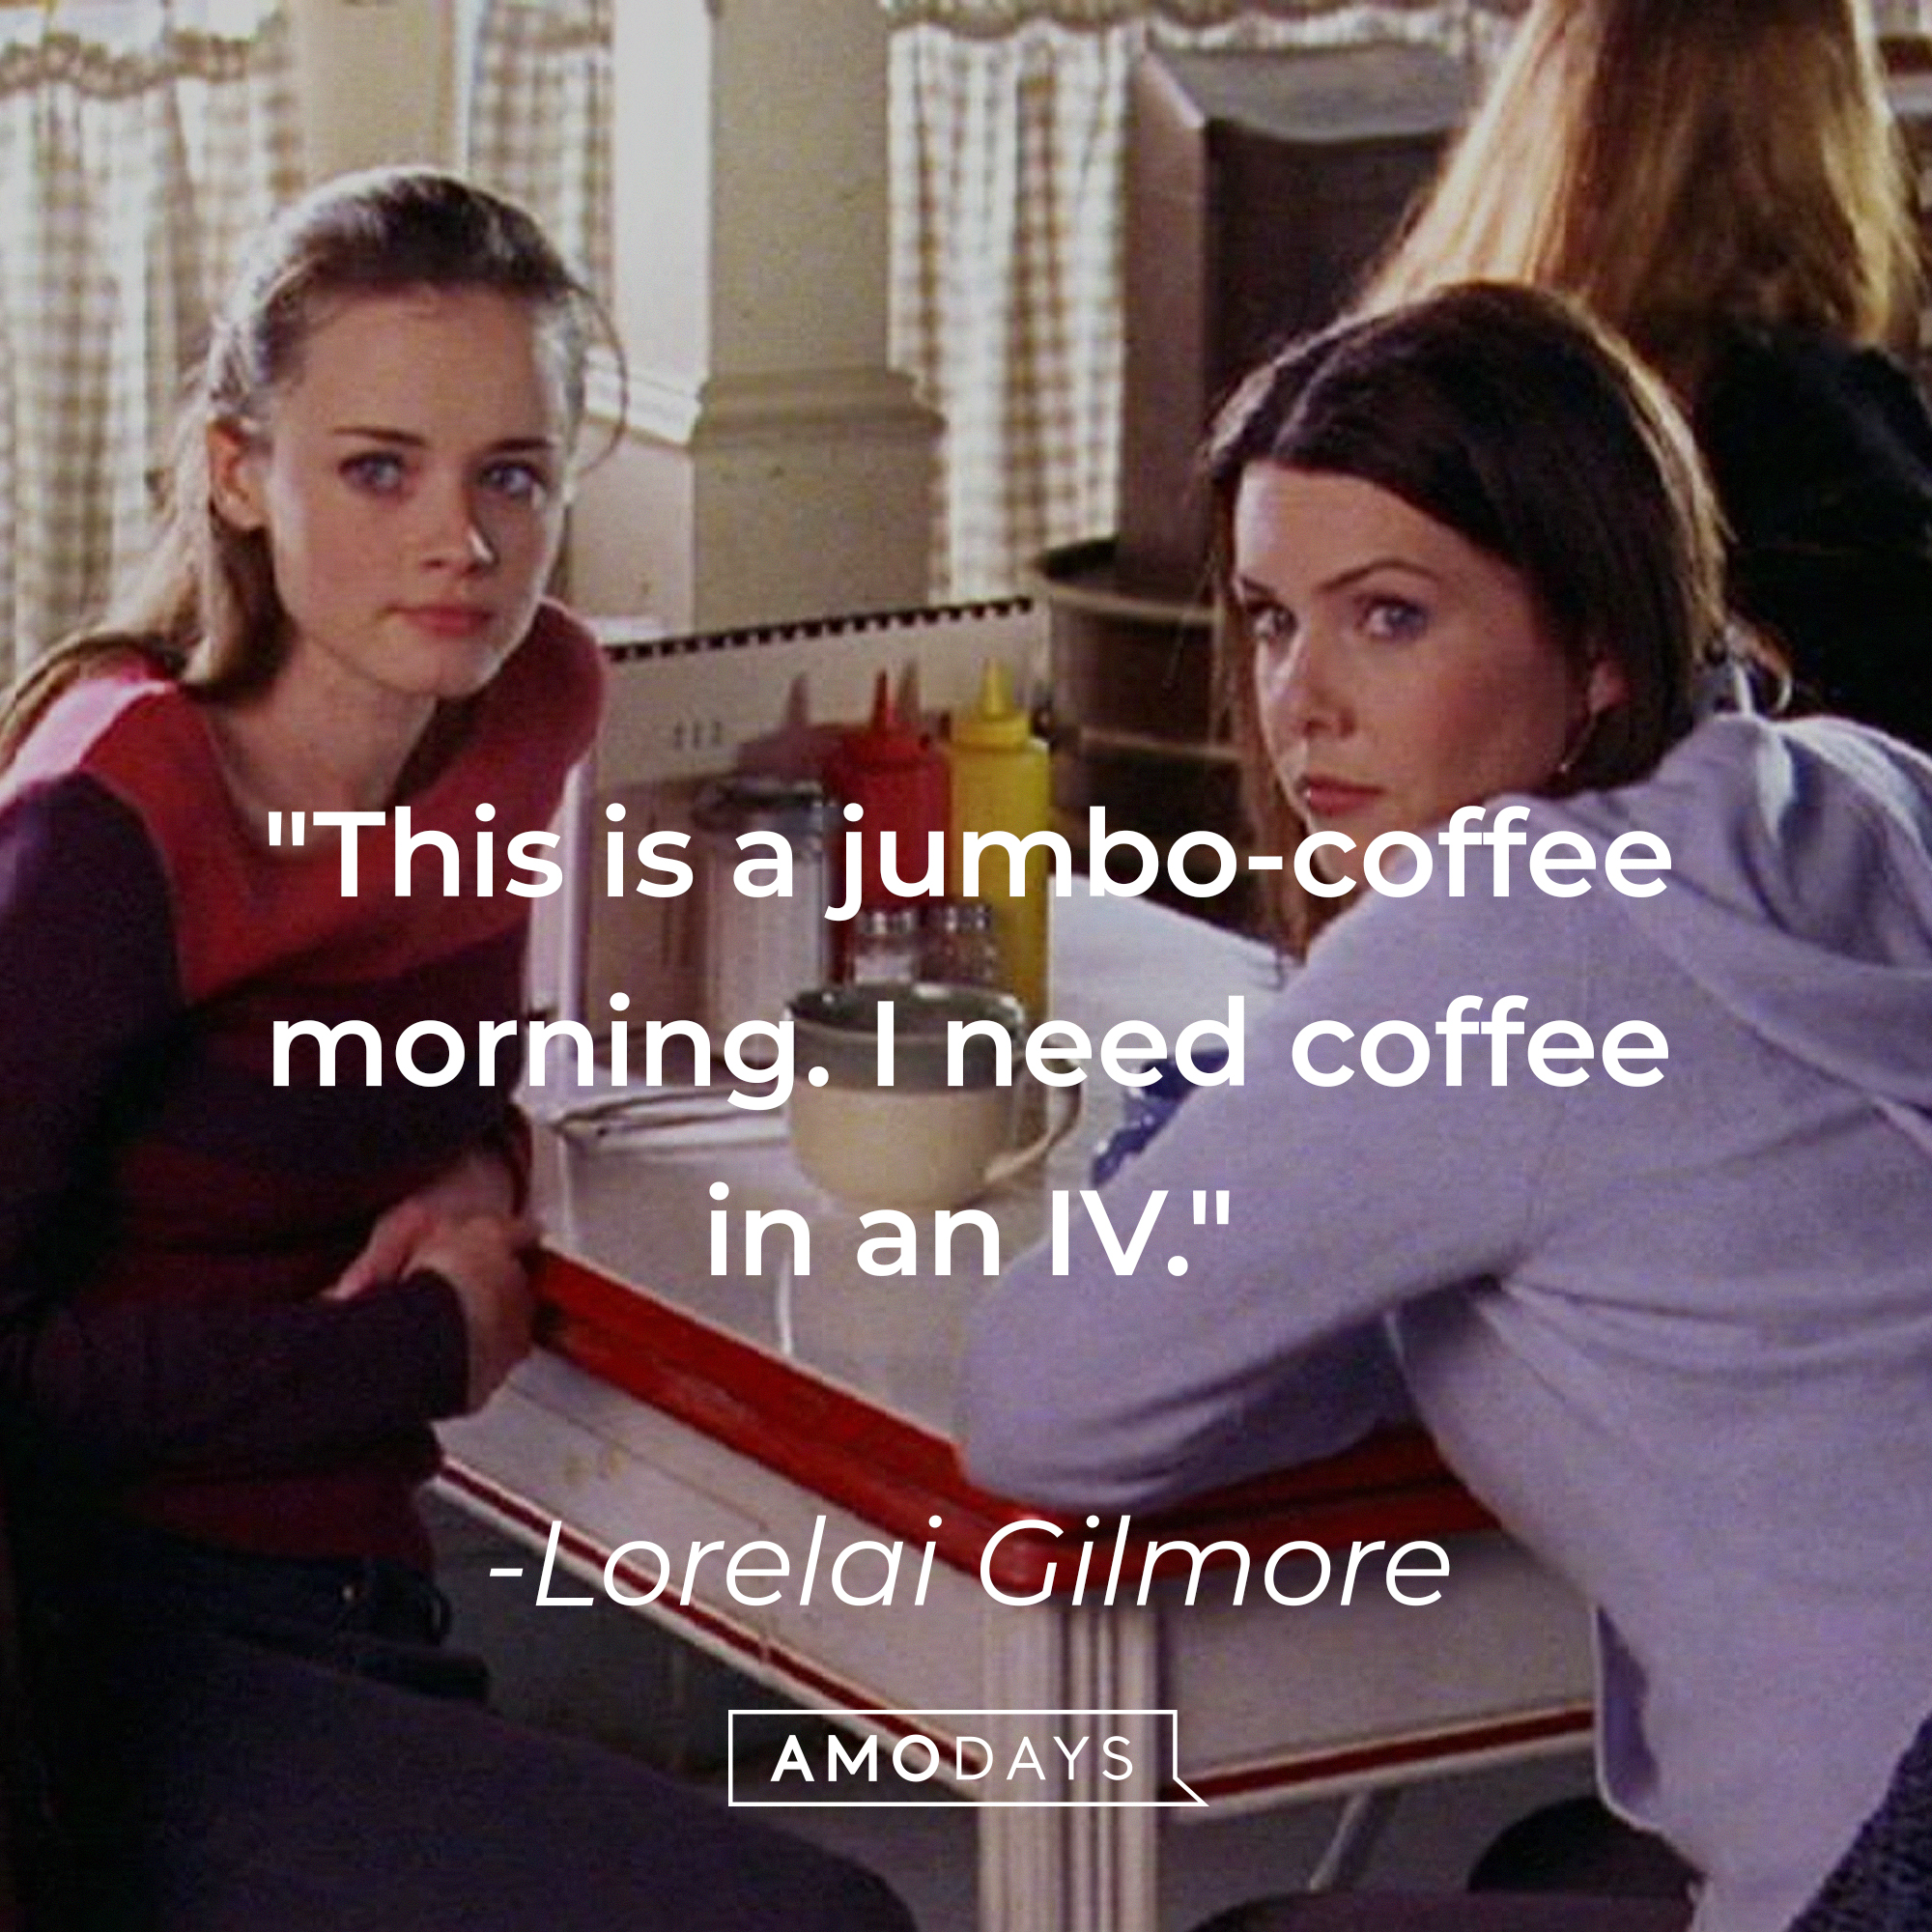 Lorelai Gilmore's quote: "This is a jumbo-coffee morning. I need coffee in an IV." | Source: Facebook/GilmoreGirls